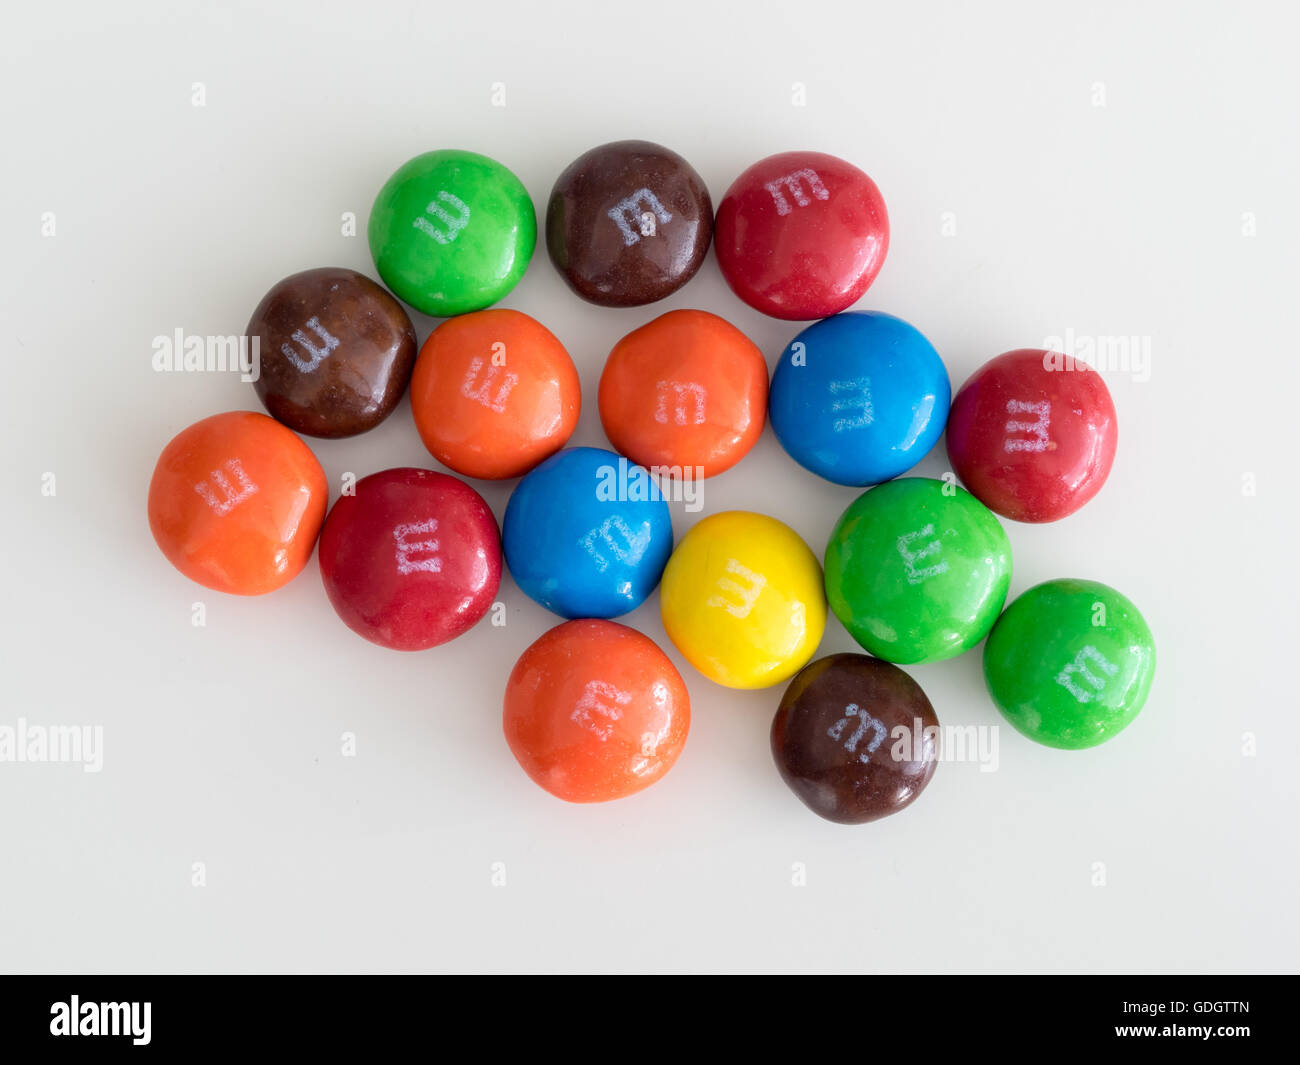 Peanut Butter M&M's, a candy produced by Mars, Inc. Canadian packaging  shown Stock Photo - Alamy